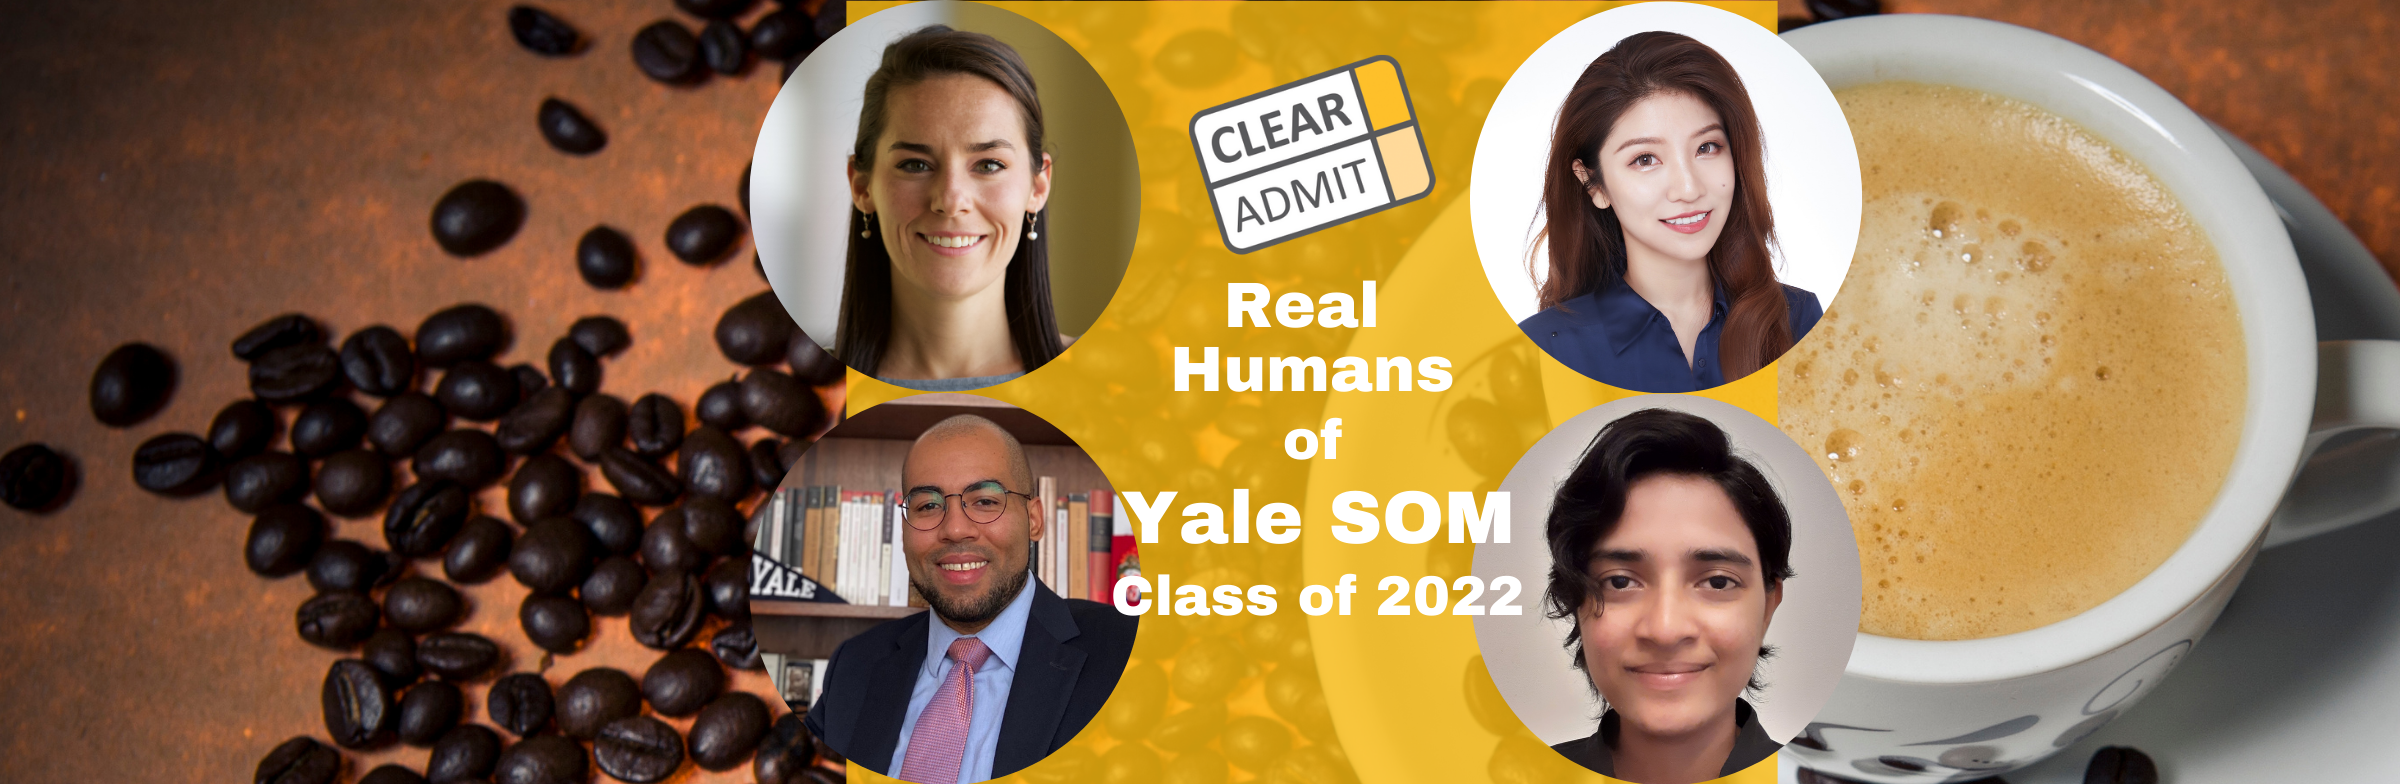 Image for Real Humans of Yale SOM’s MBA Class of 2022